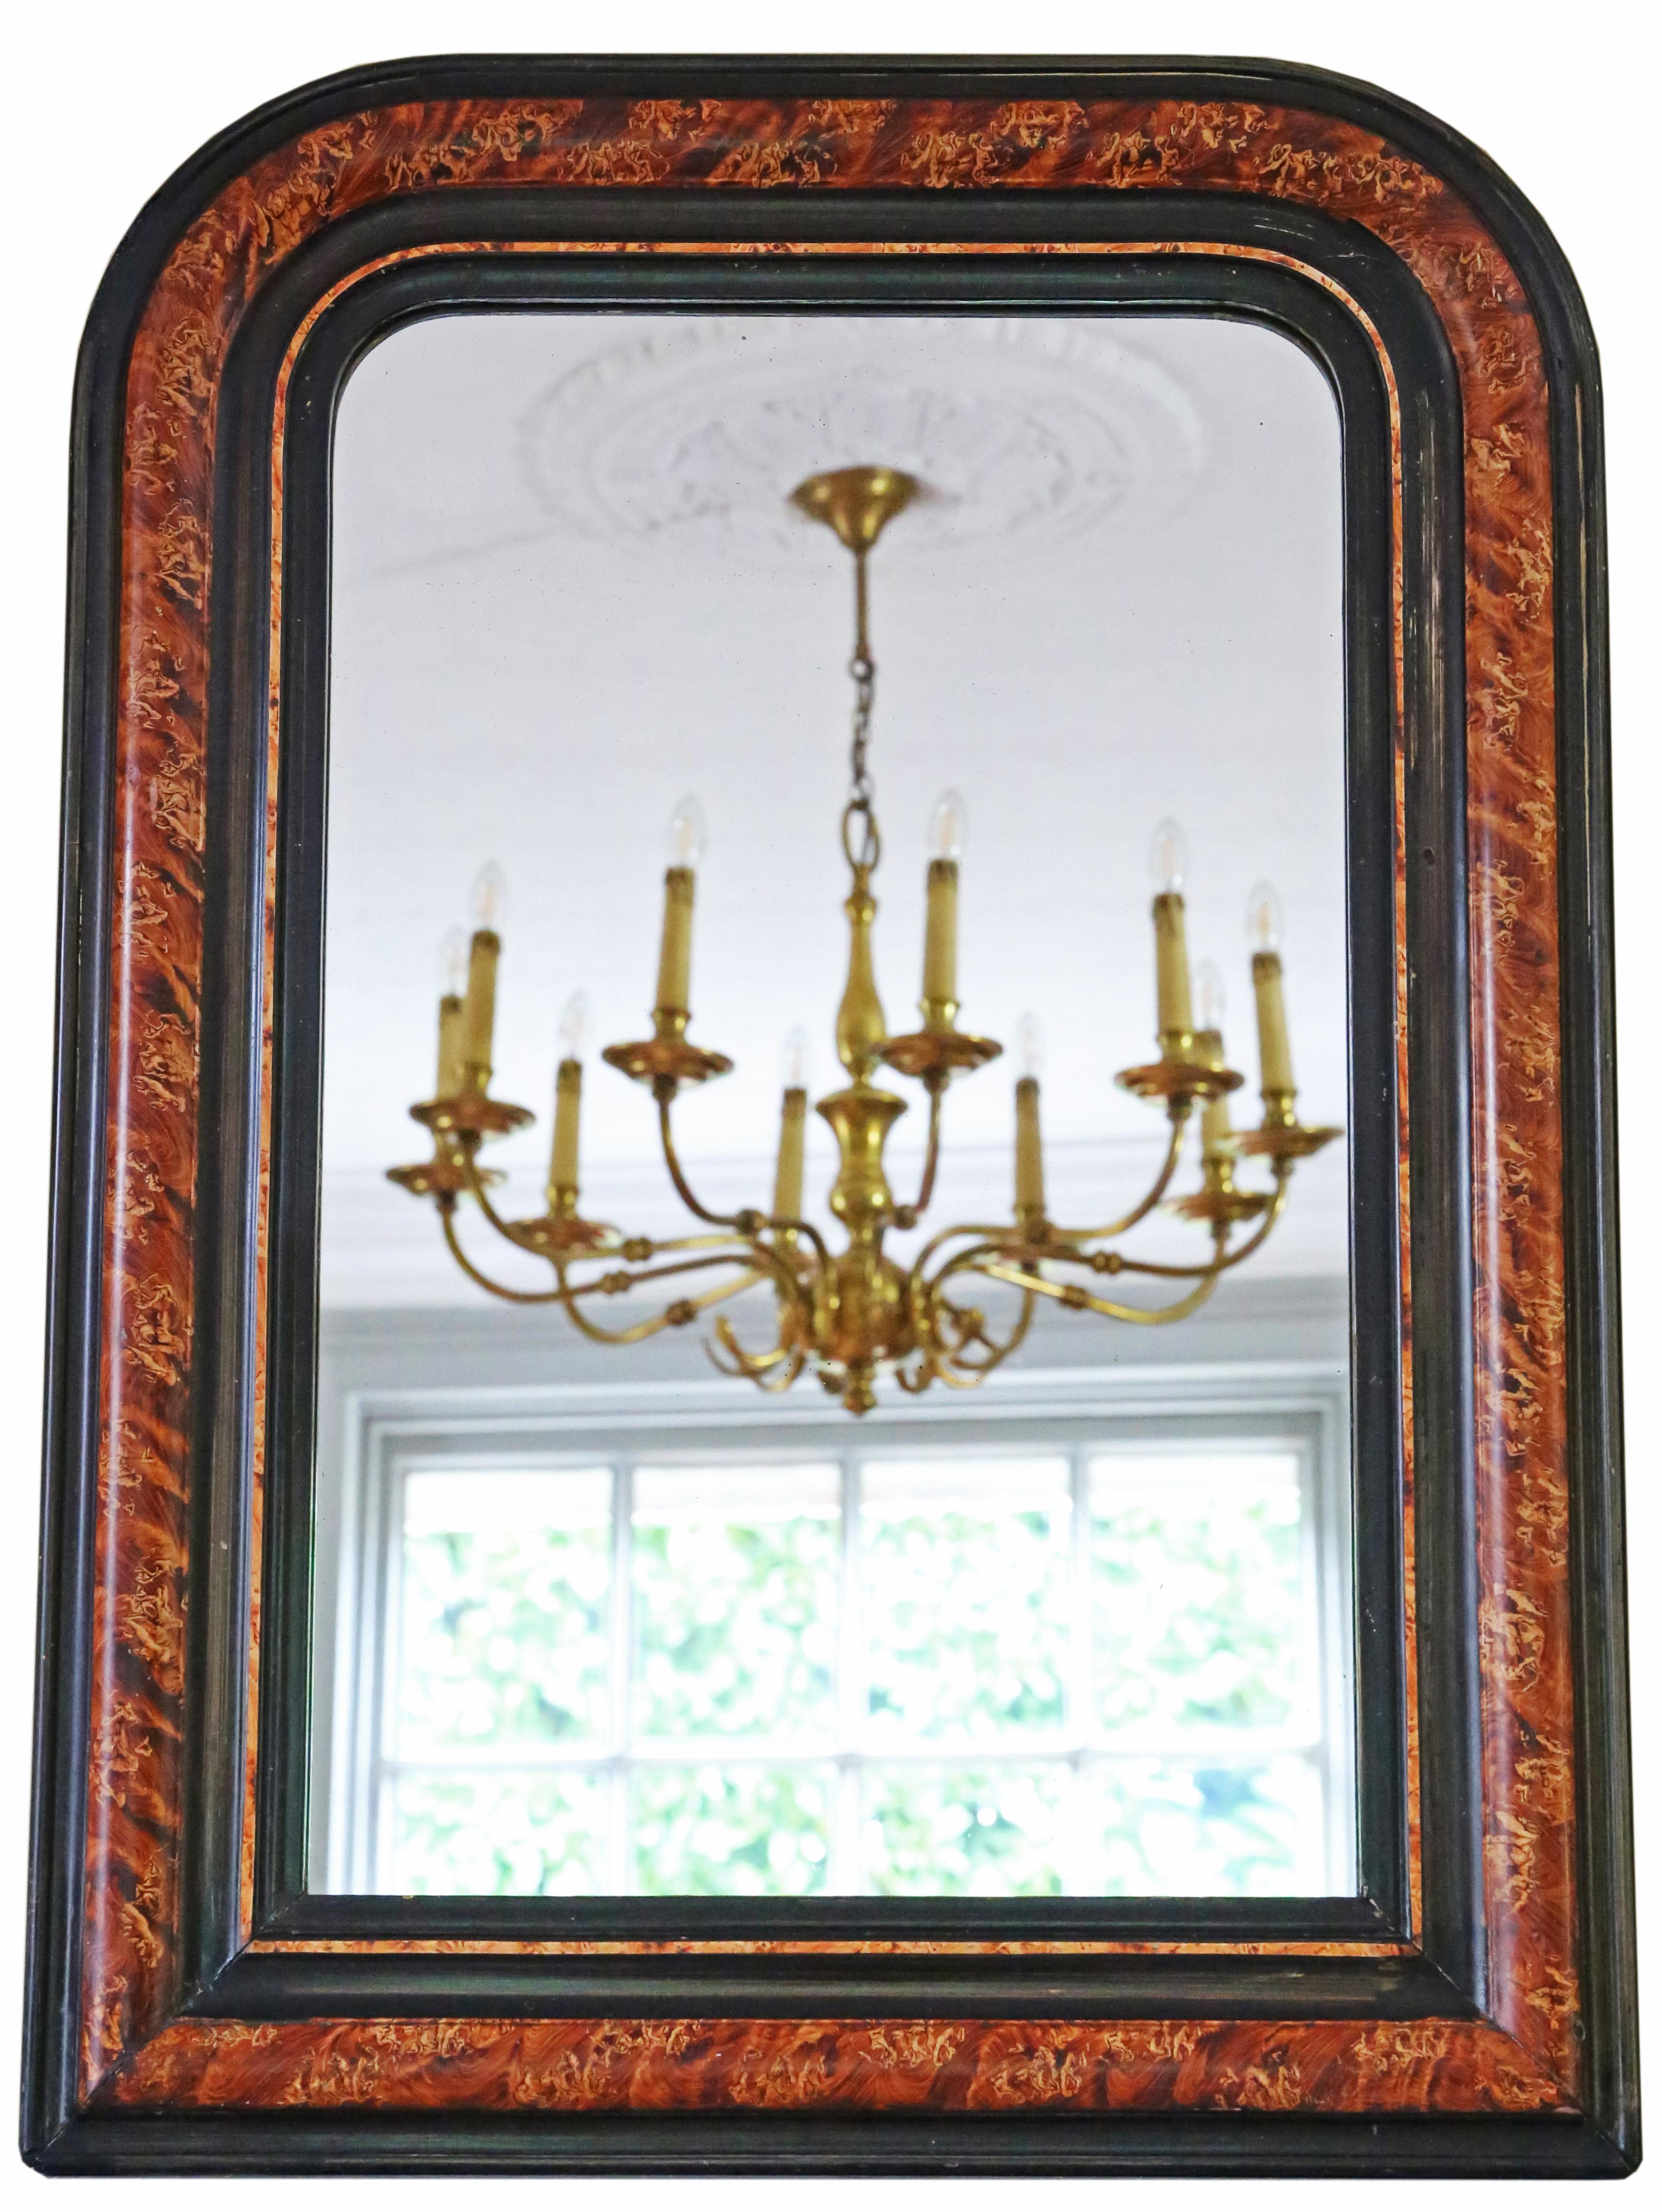 Superb large 19th Century faux tortoise shell and ebonised overmantle wall mirror, reflecting exquisite quality.

This enchanting and uncommon mirror distinguishes itself as a delightful and rare discovery, offering a distinctive touch that sets it